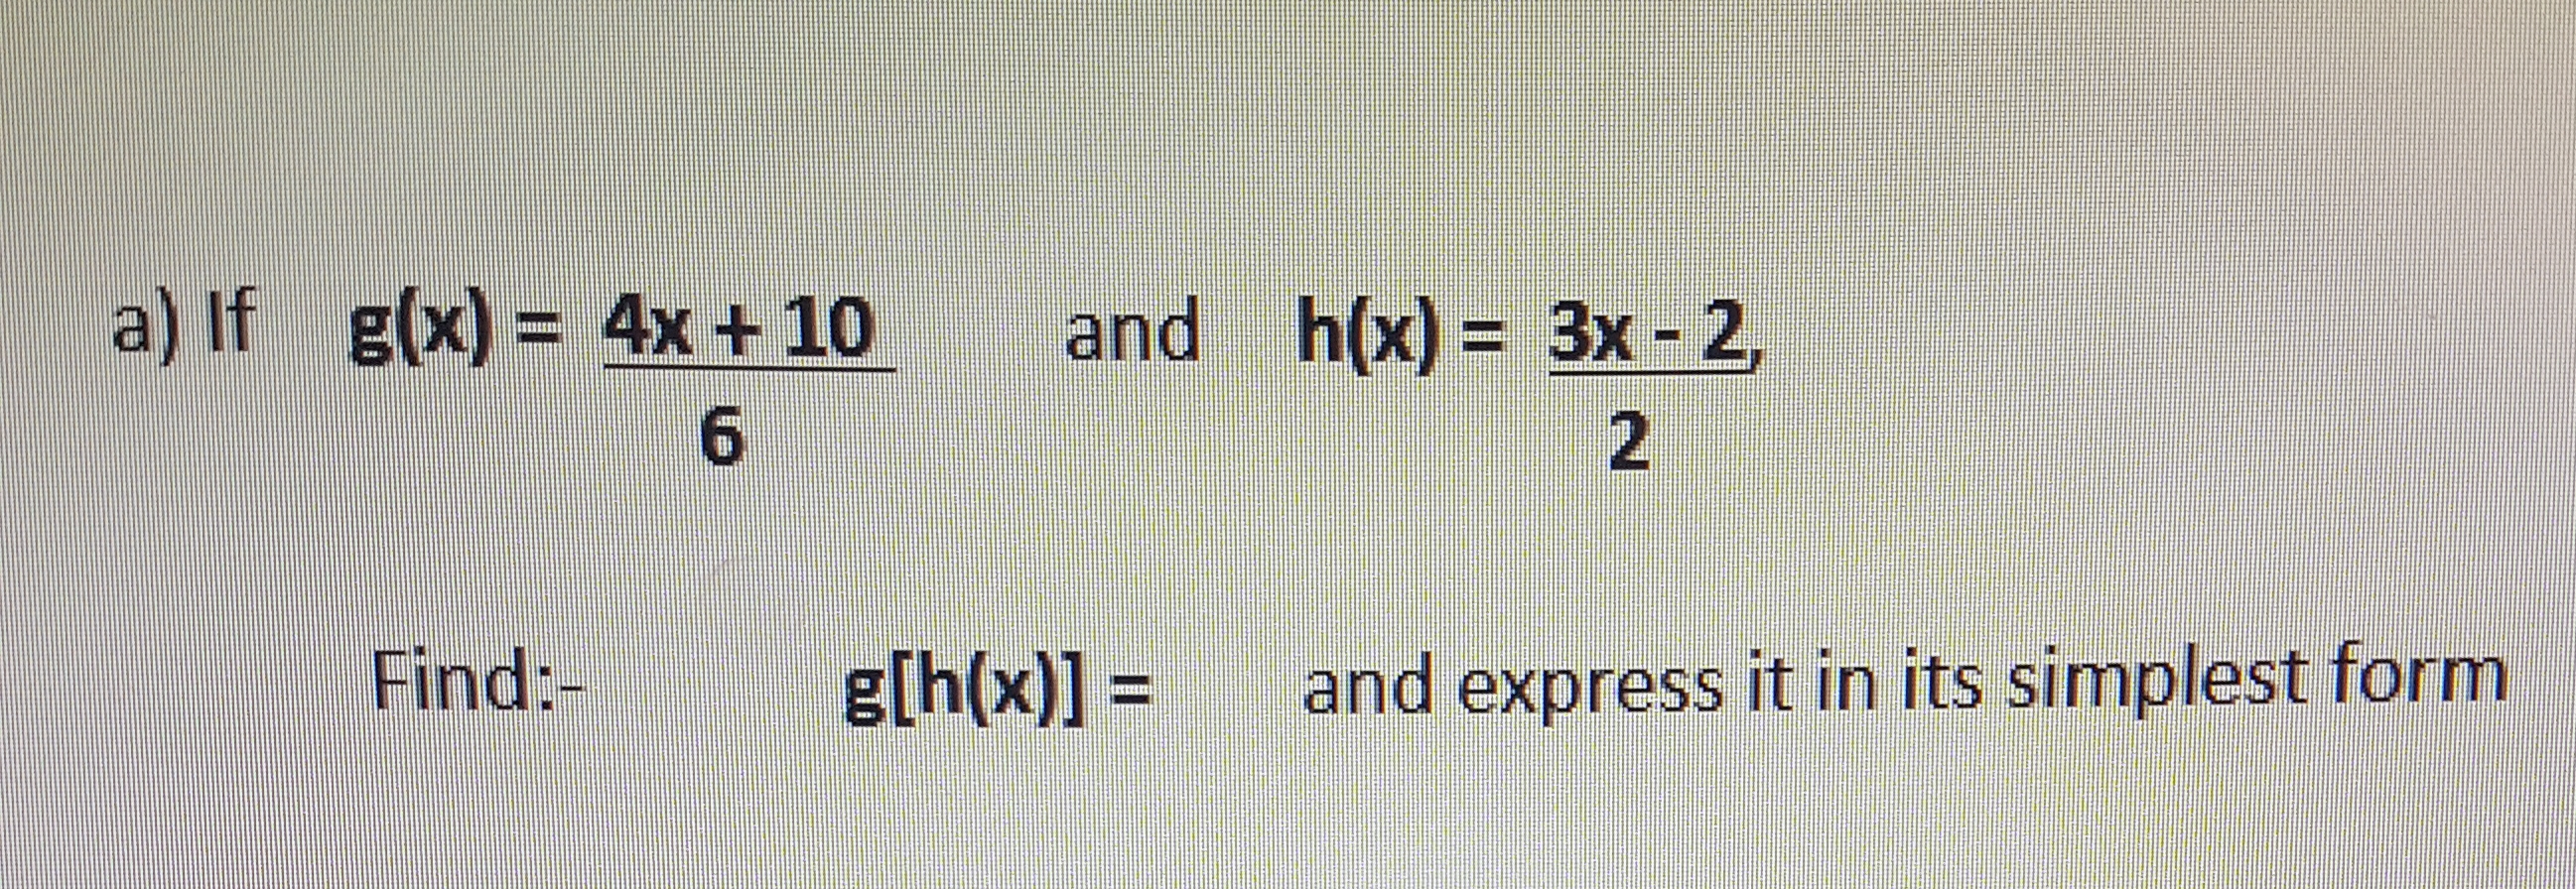 a) If g(x) = 4x + 10
and h(x) = 3x - 2,
%3D
Find:-
g[h(x)] =
and express it in its simplest form
%3D
